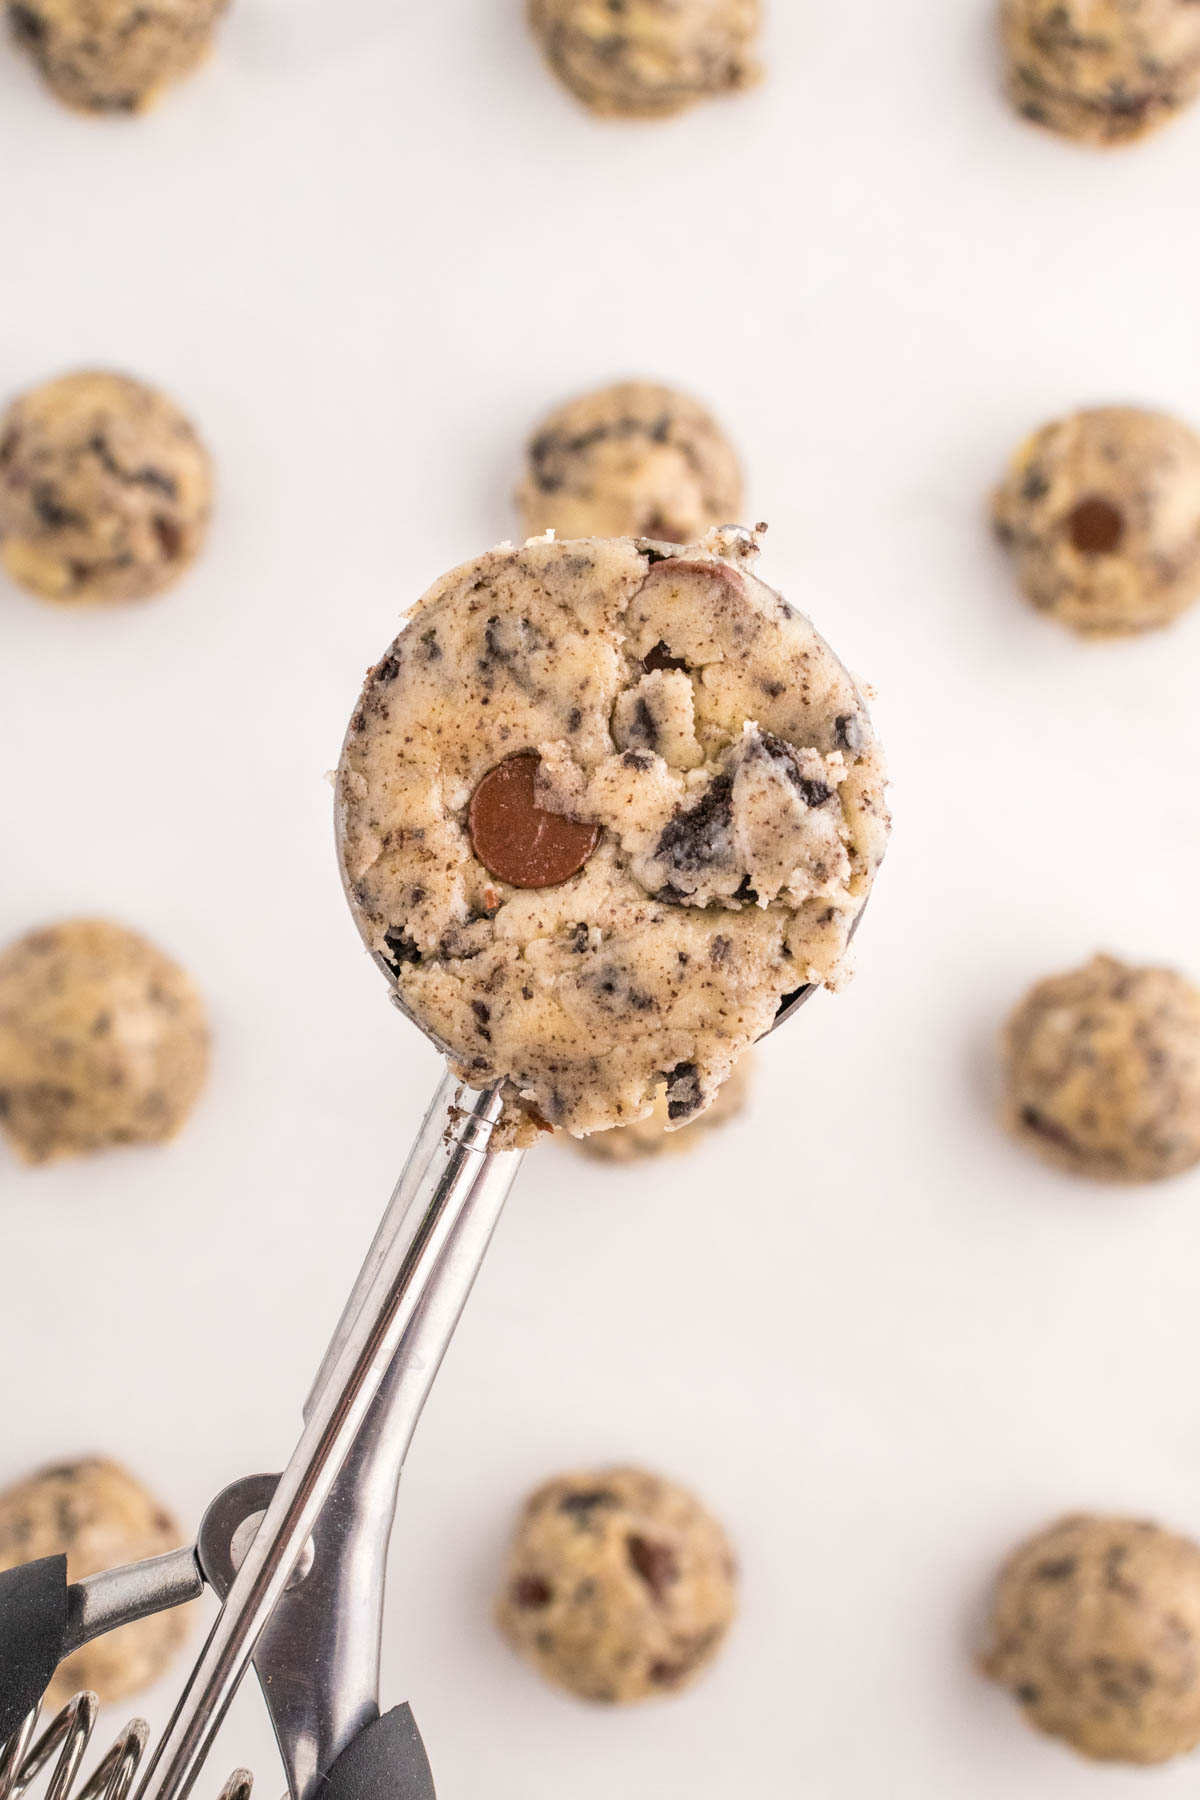 A cookie scoop containing raw oreo cake mix cookie dough, with more dough balls in the background.